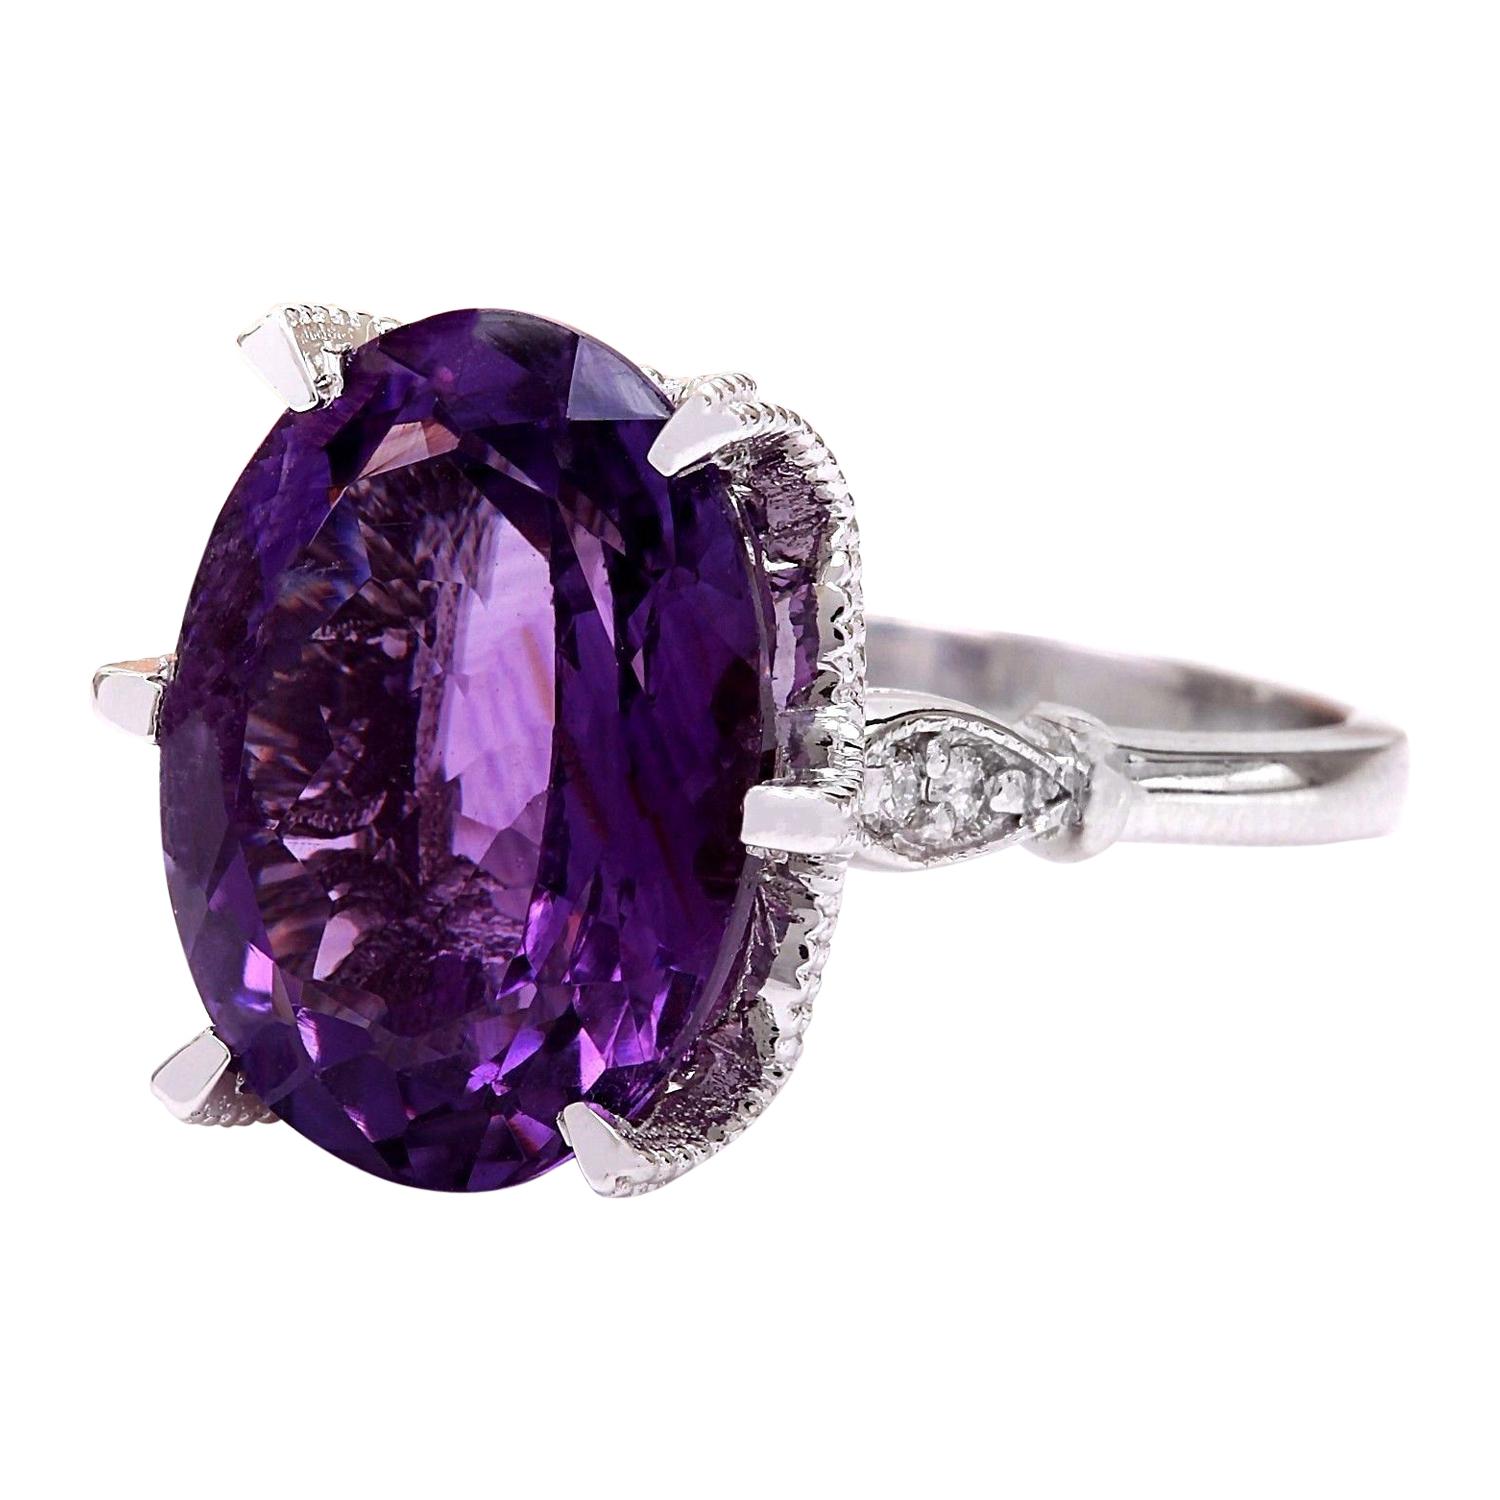 8.64 Carat Natural Amethyst 14K Solid White Gold Diamond Ring
 Item Type: Ring
 Item Style: Cocktail
 Material: 14K White Gold
 Mainstone: Amethyst
 Stone Color: Purple
 Stone Weight: 8.54 Carat
 Stone Shape: Oval
 Stone Quantity: 1
 Stone